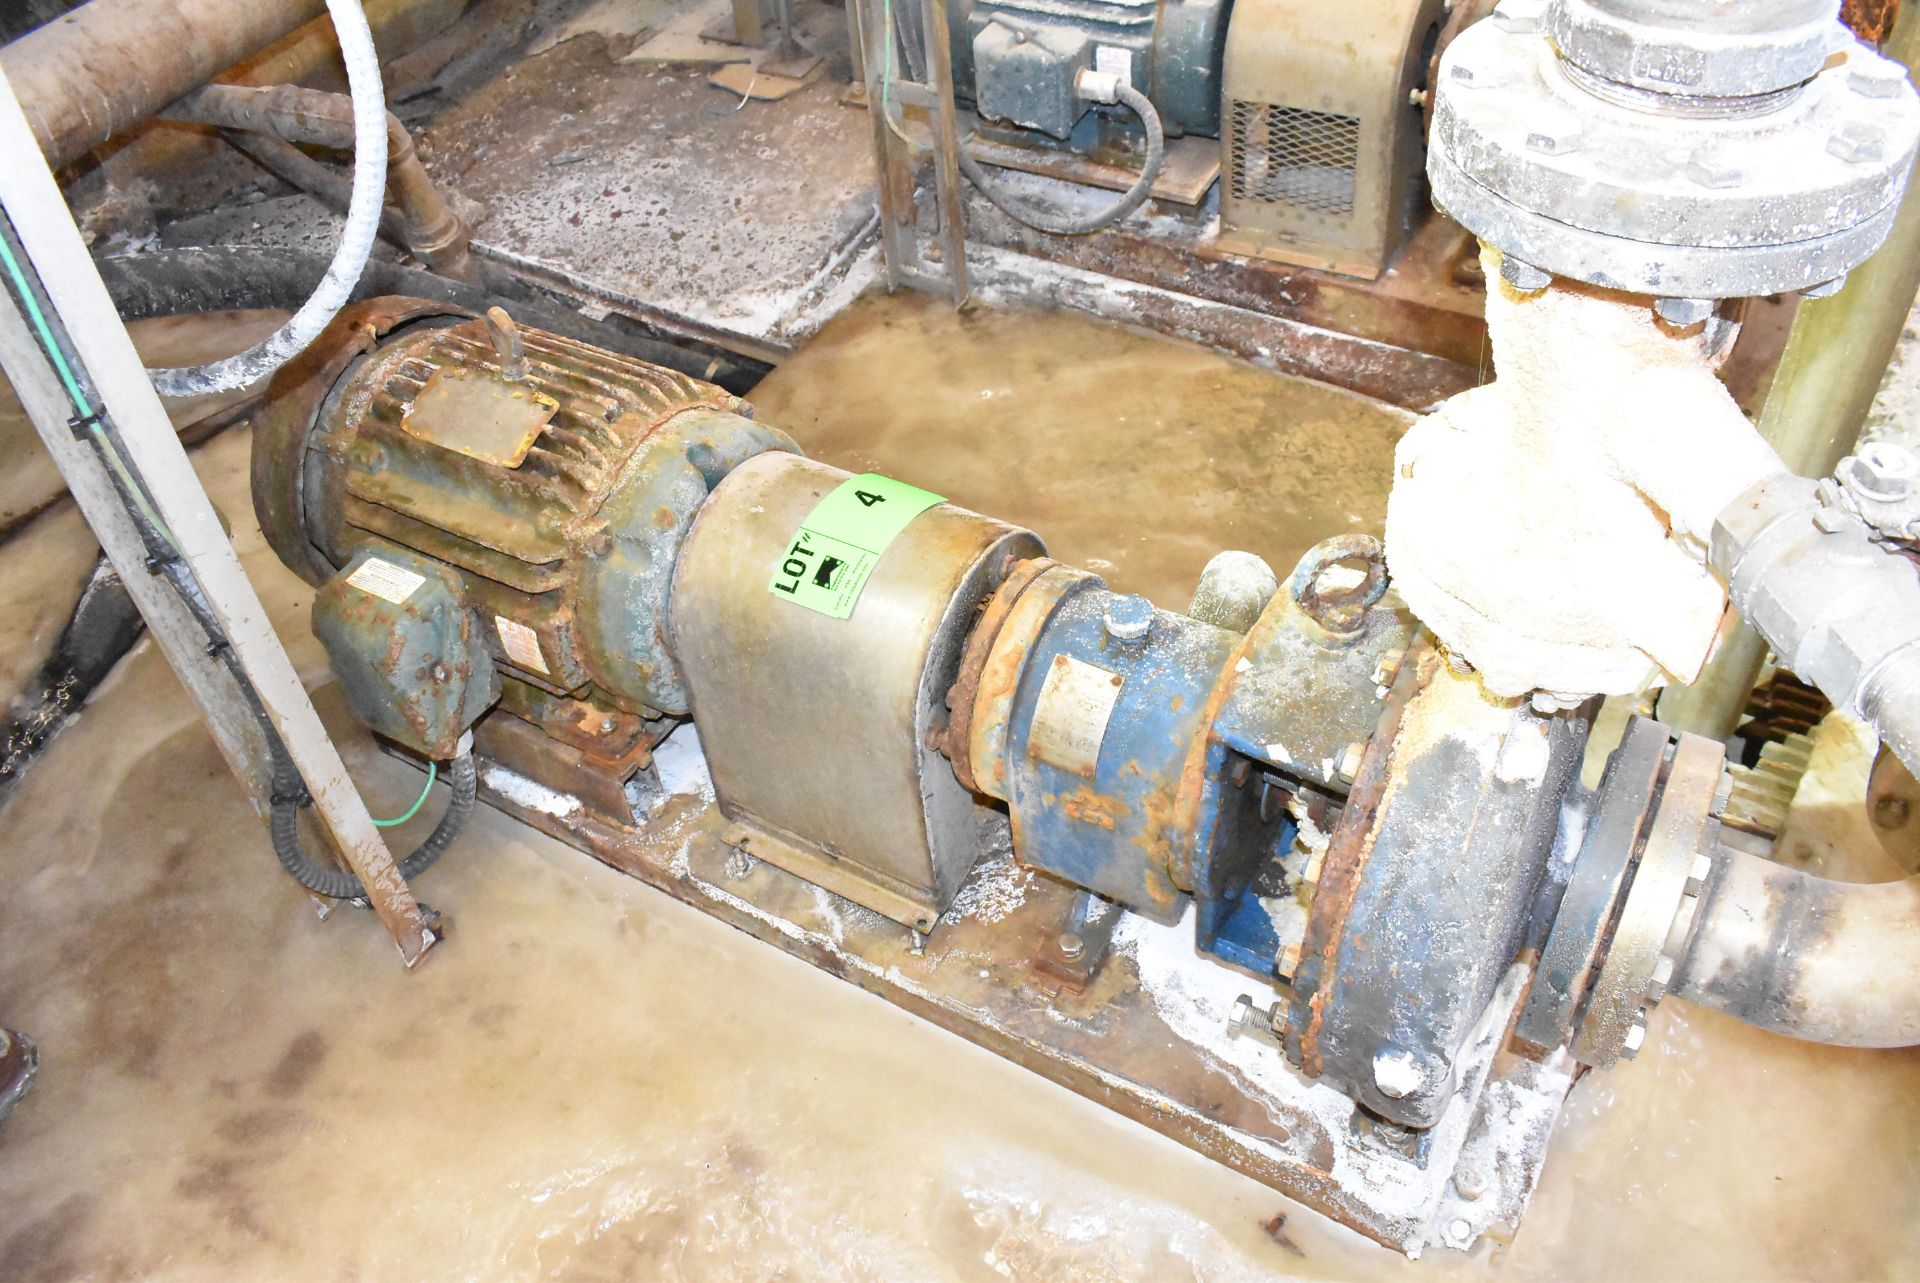 BALDOR RELIANCE 20HP PUMP WITH 2,700 RPM MAX., 575V/3PH/60HZ, S/N N/A [RIGGING FEE FOR LOT #4 - $250